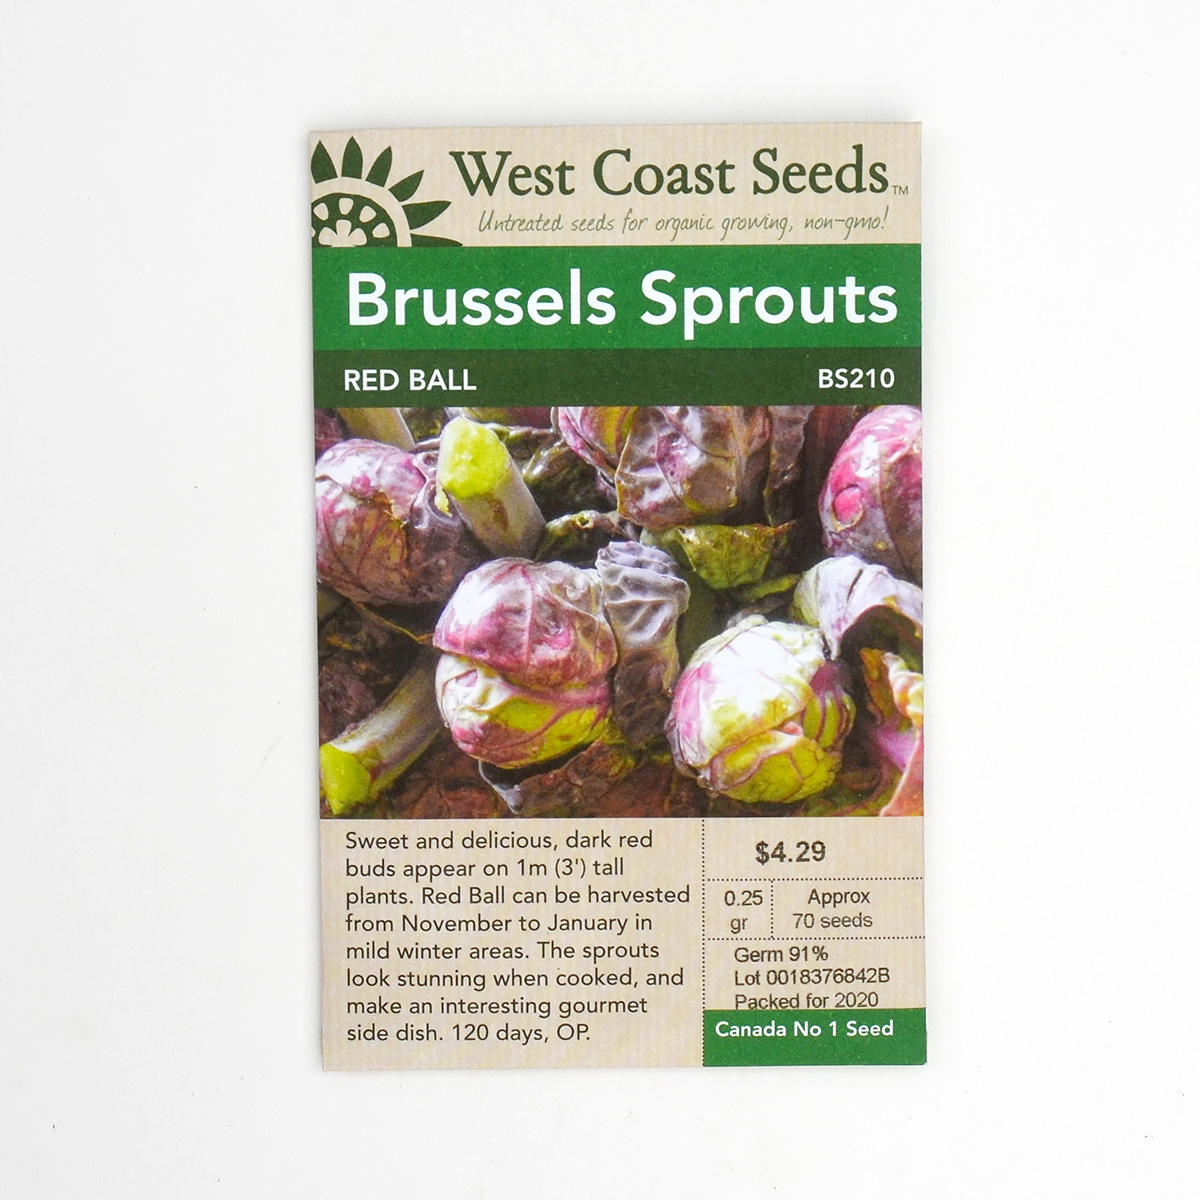 Brussels Sprouts Red Ball Seeds BS210